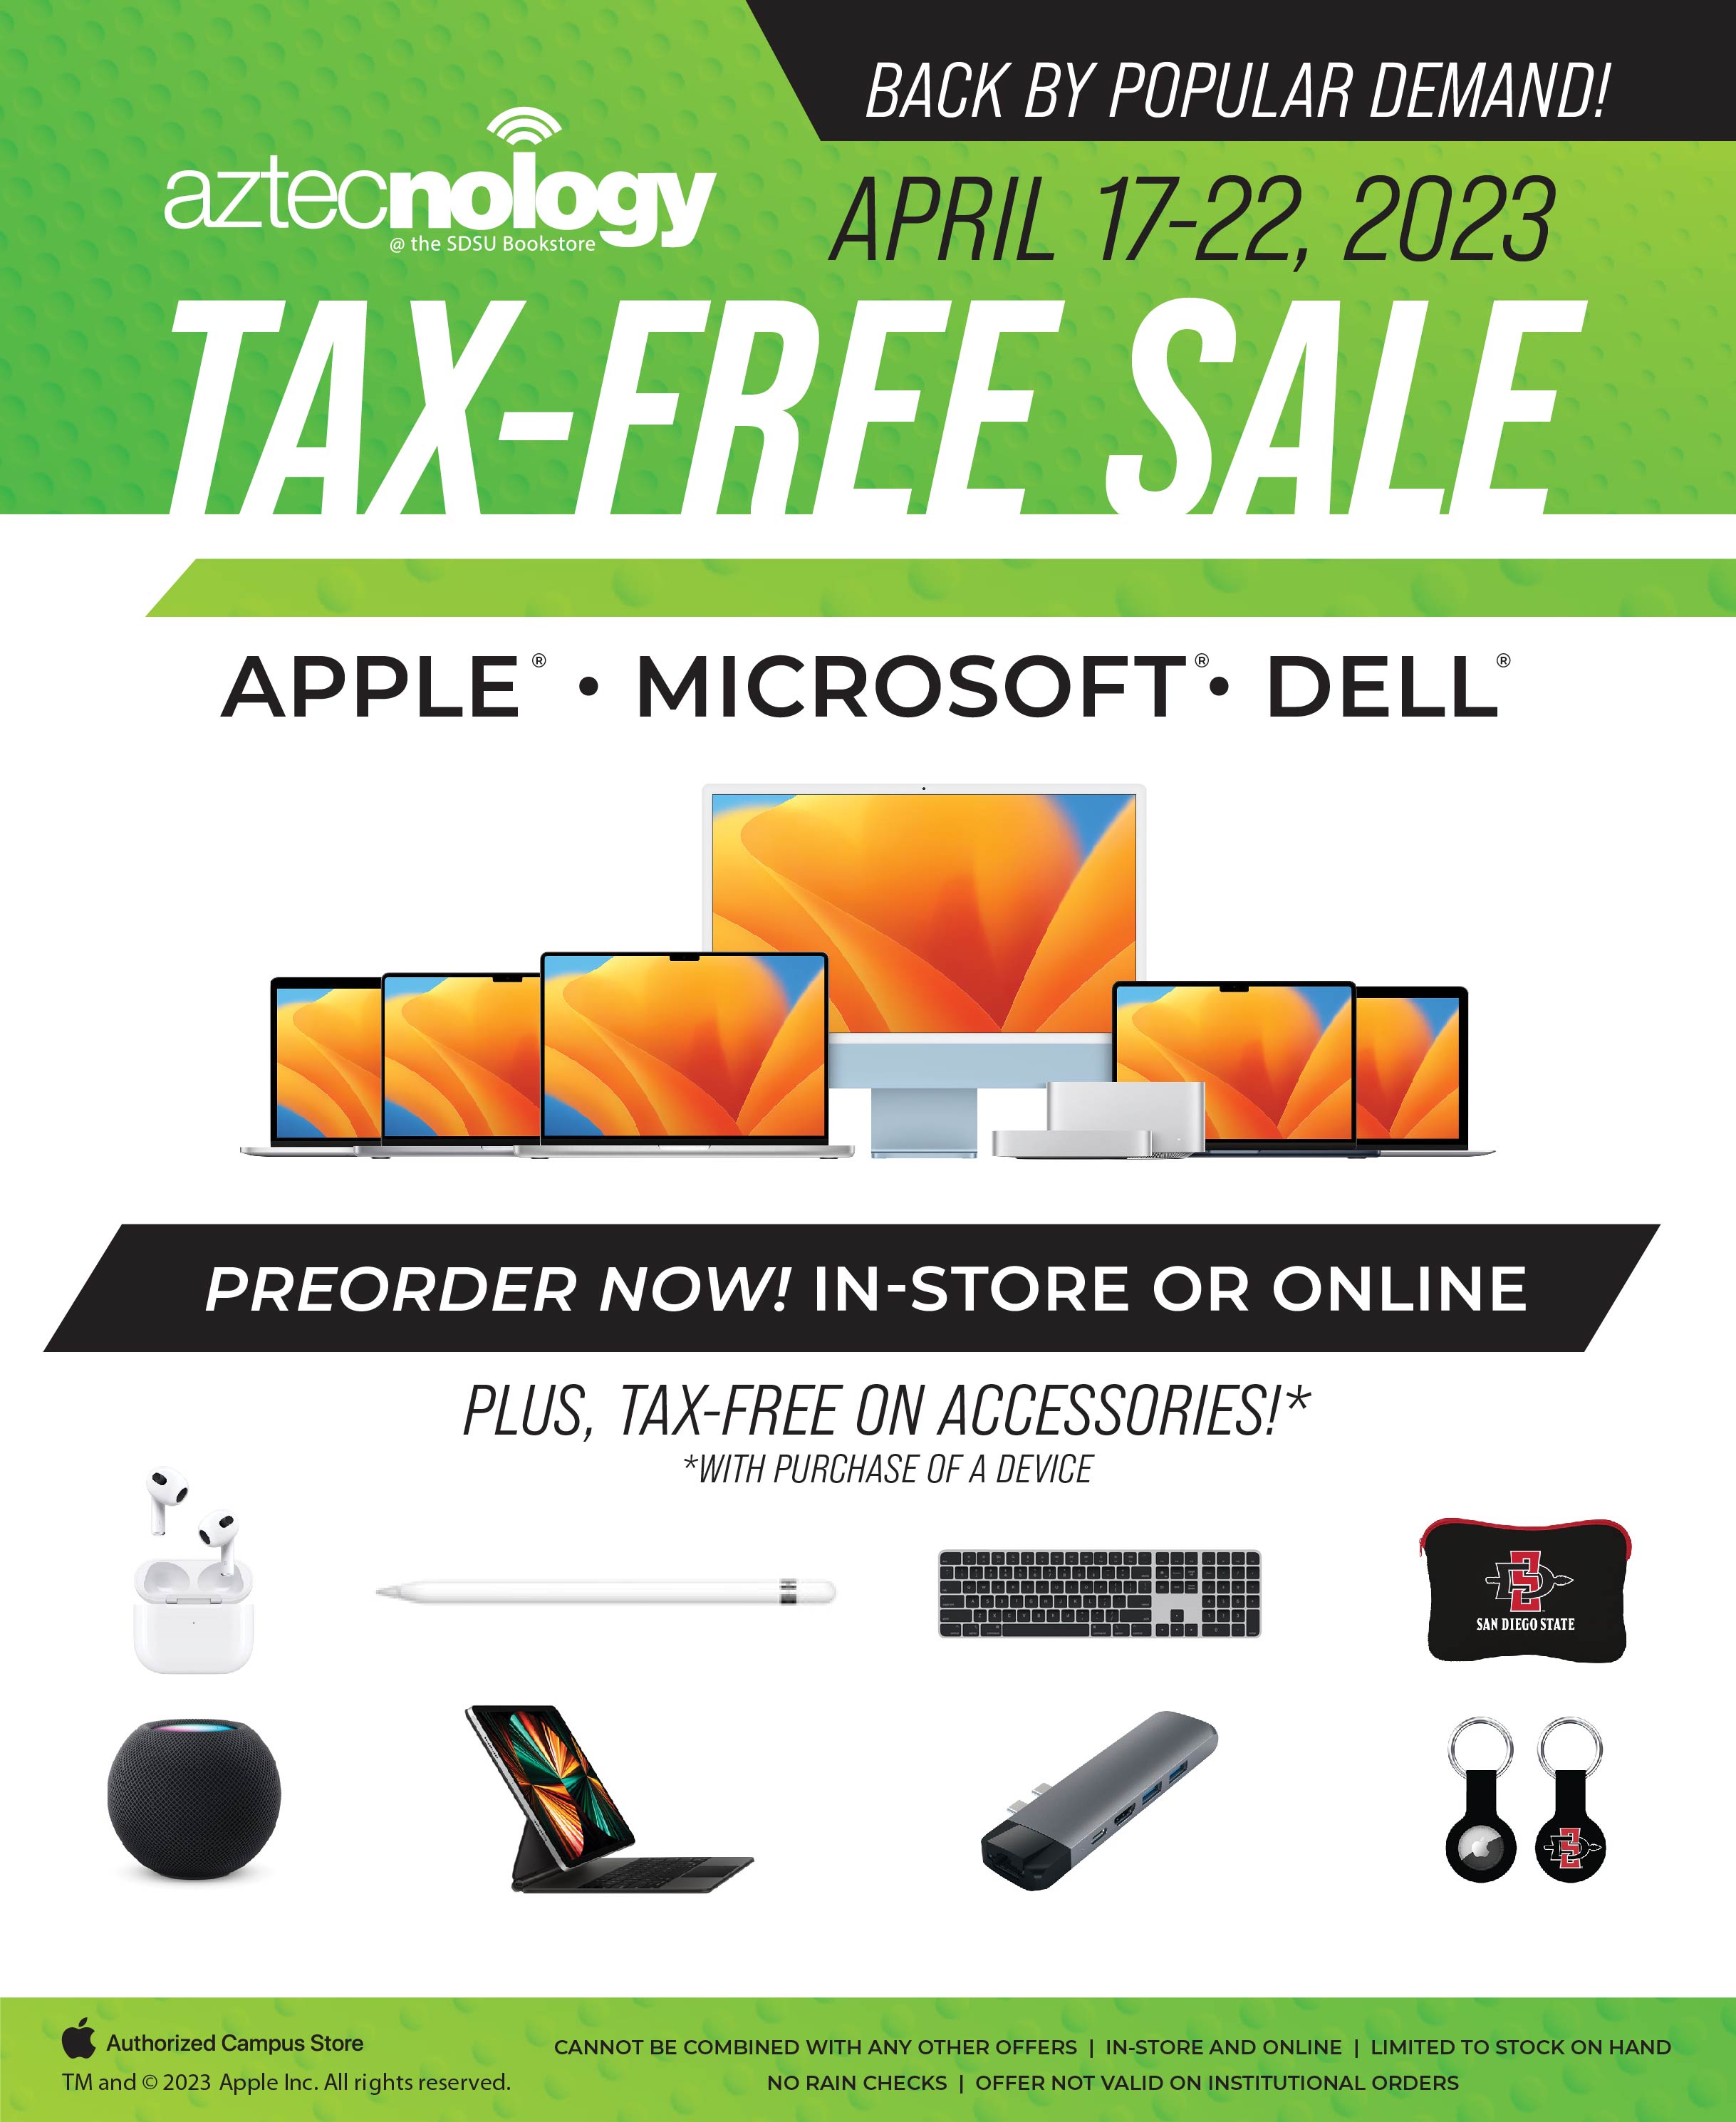 Tax-Free Sale April 17th - 22nd. Apple. Microsoft. Dell. Tax-free sale. Preorder now! In-store or online. Plus, tax-free on accessories with purchase of a device.